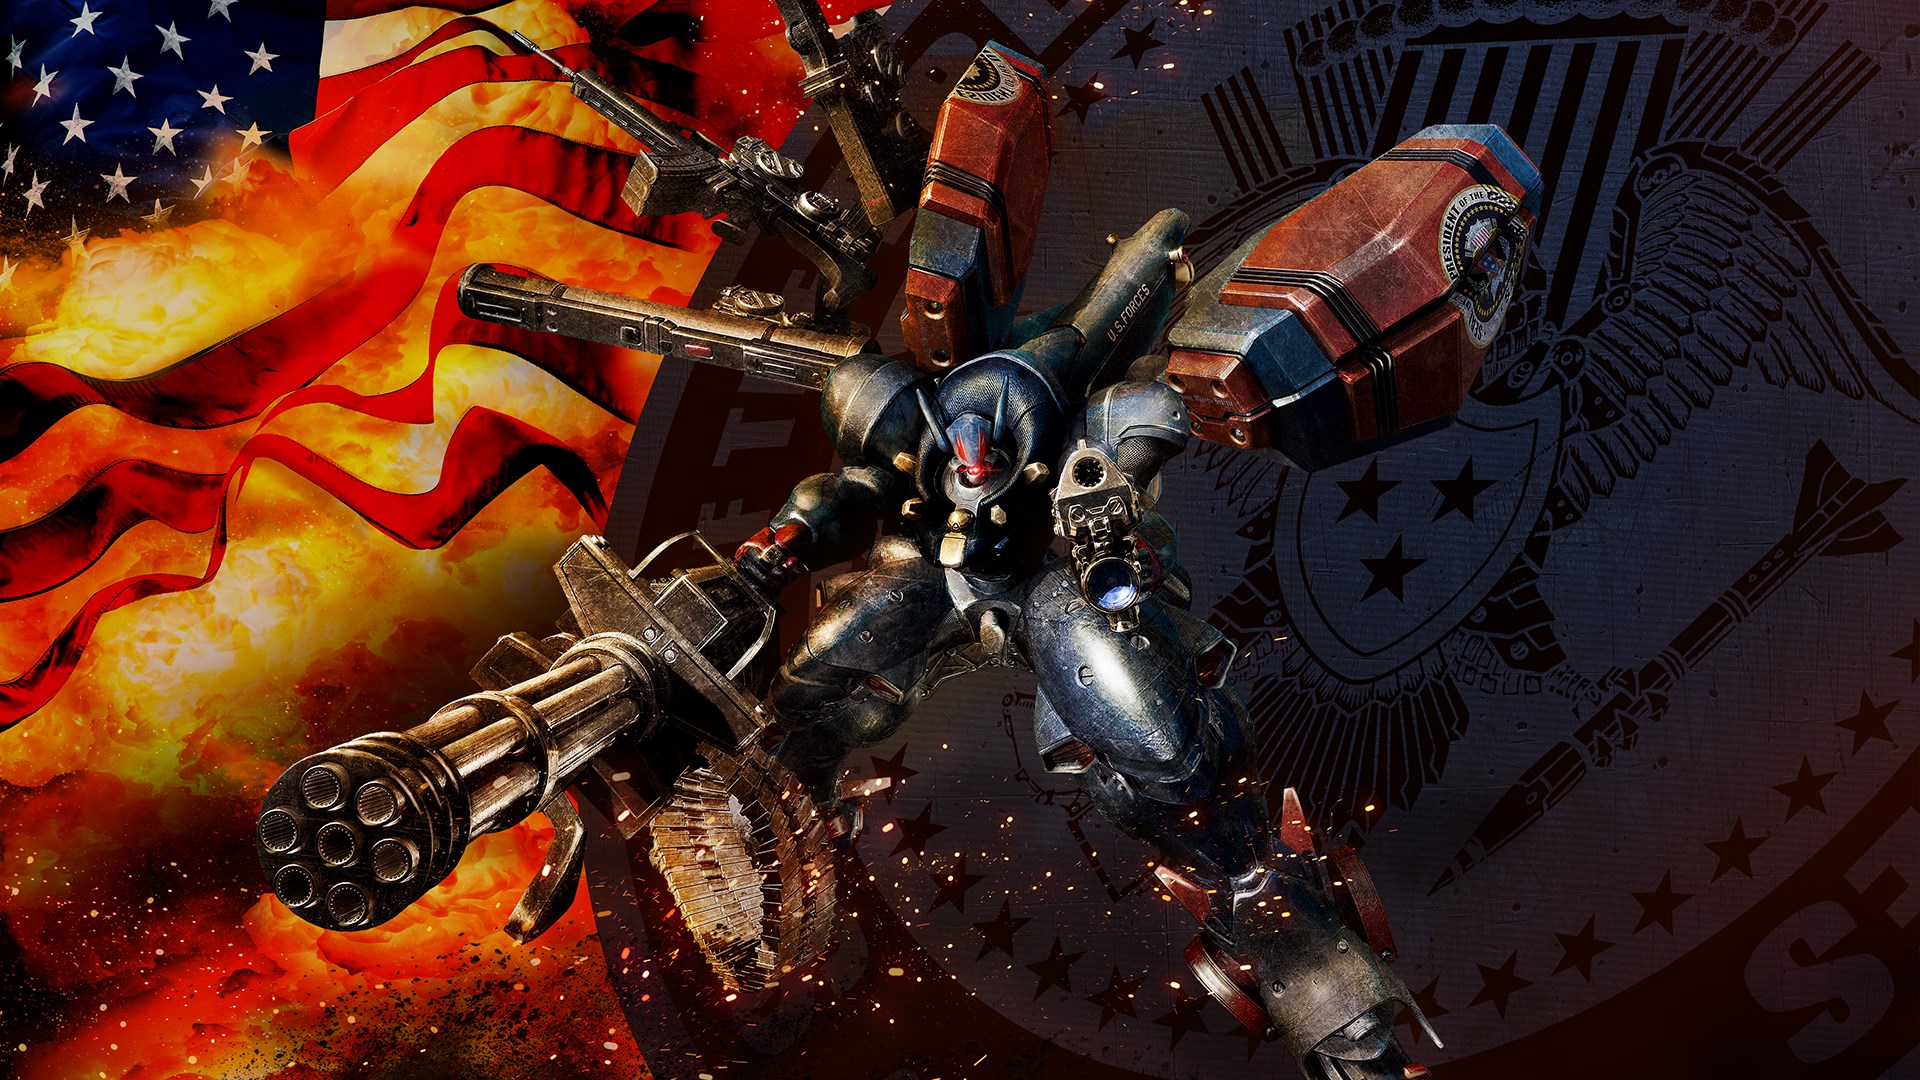 metal wolf chaos xd review xbox one 1